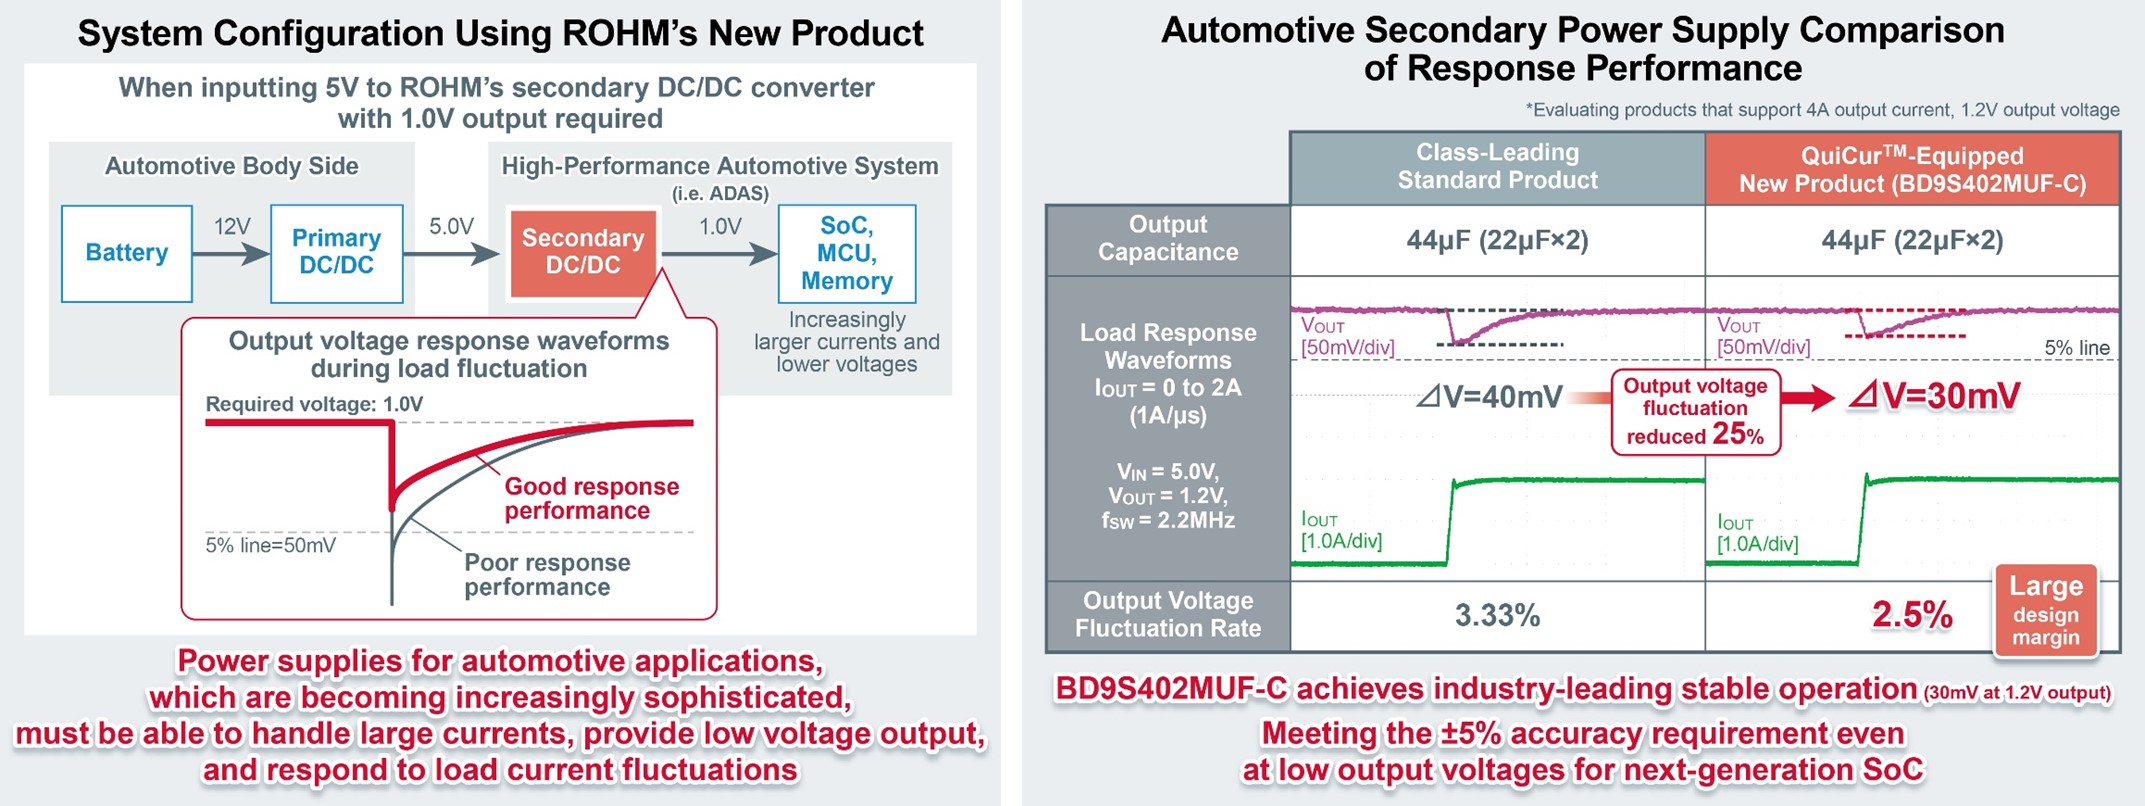 System Configuration and Automotive Secondary Power Supply Comparison